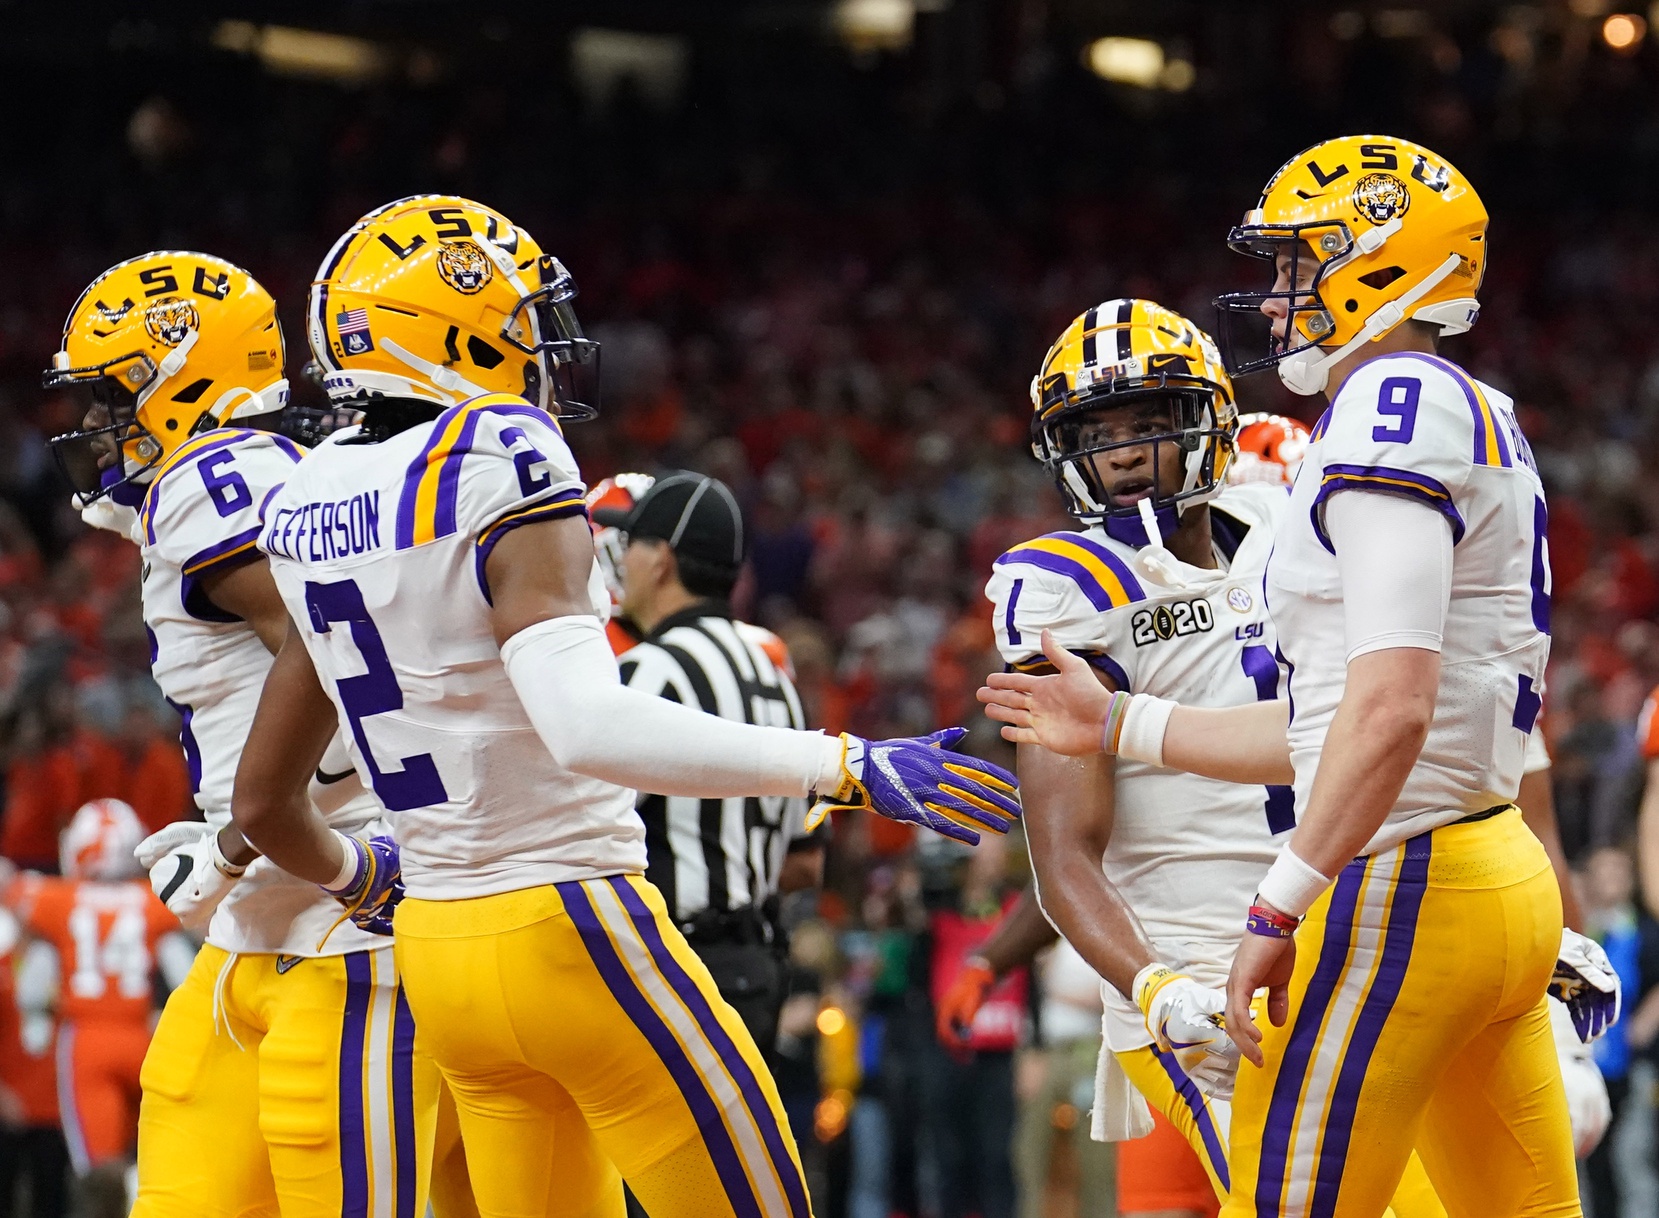 Biggest highlights from LSU's win over Clemson in CFP National Championship Game